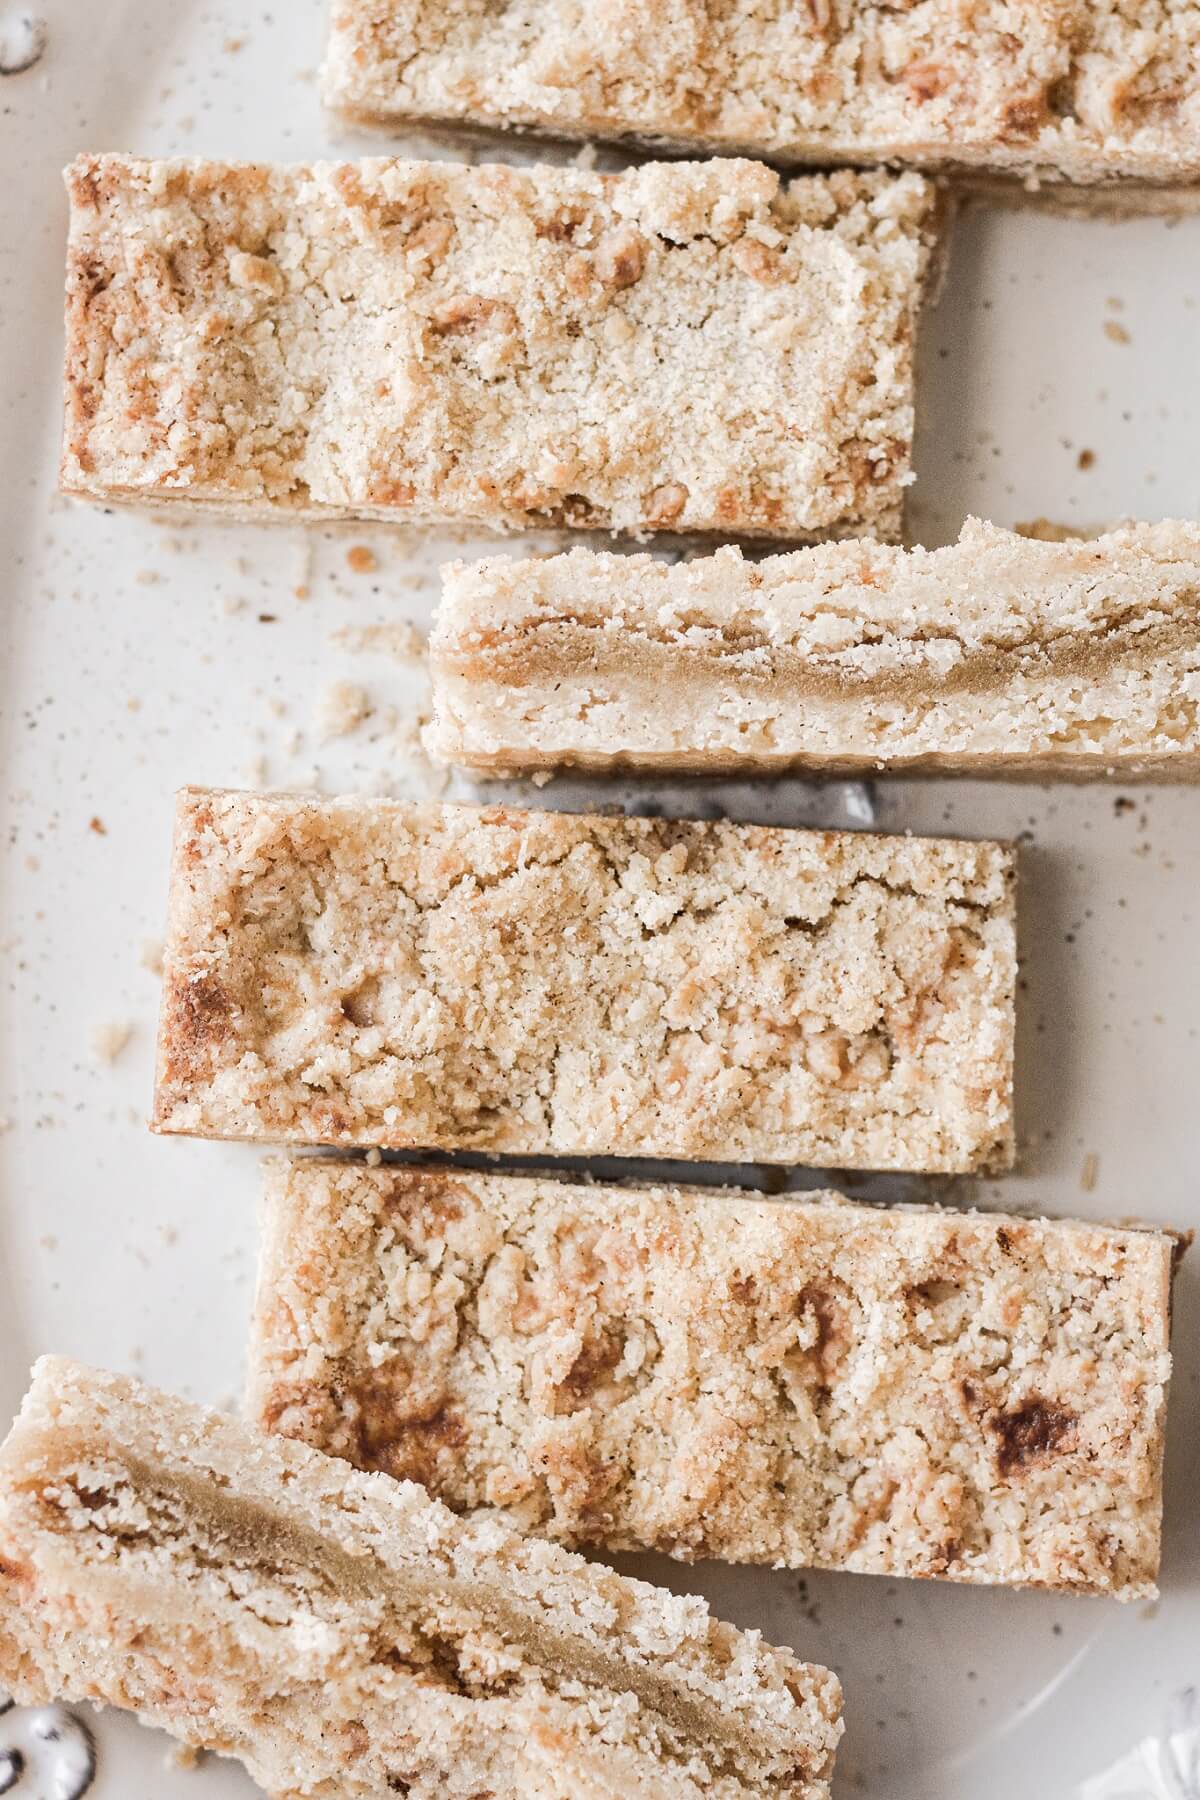 Almond crumb bars filled with almond paste.